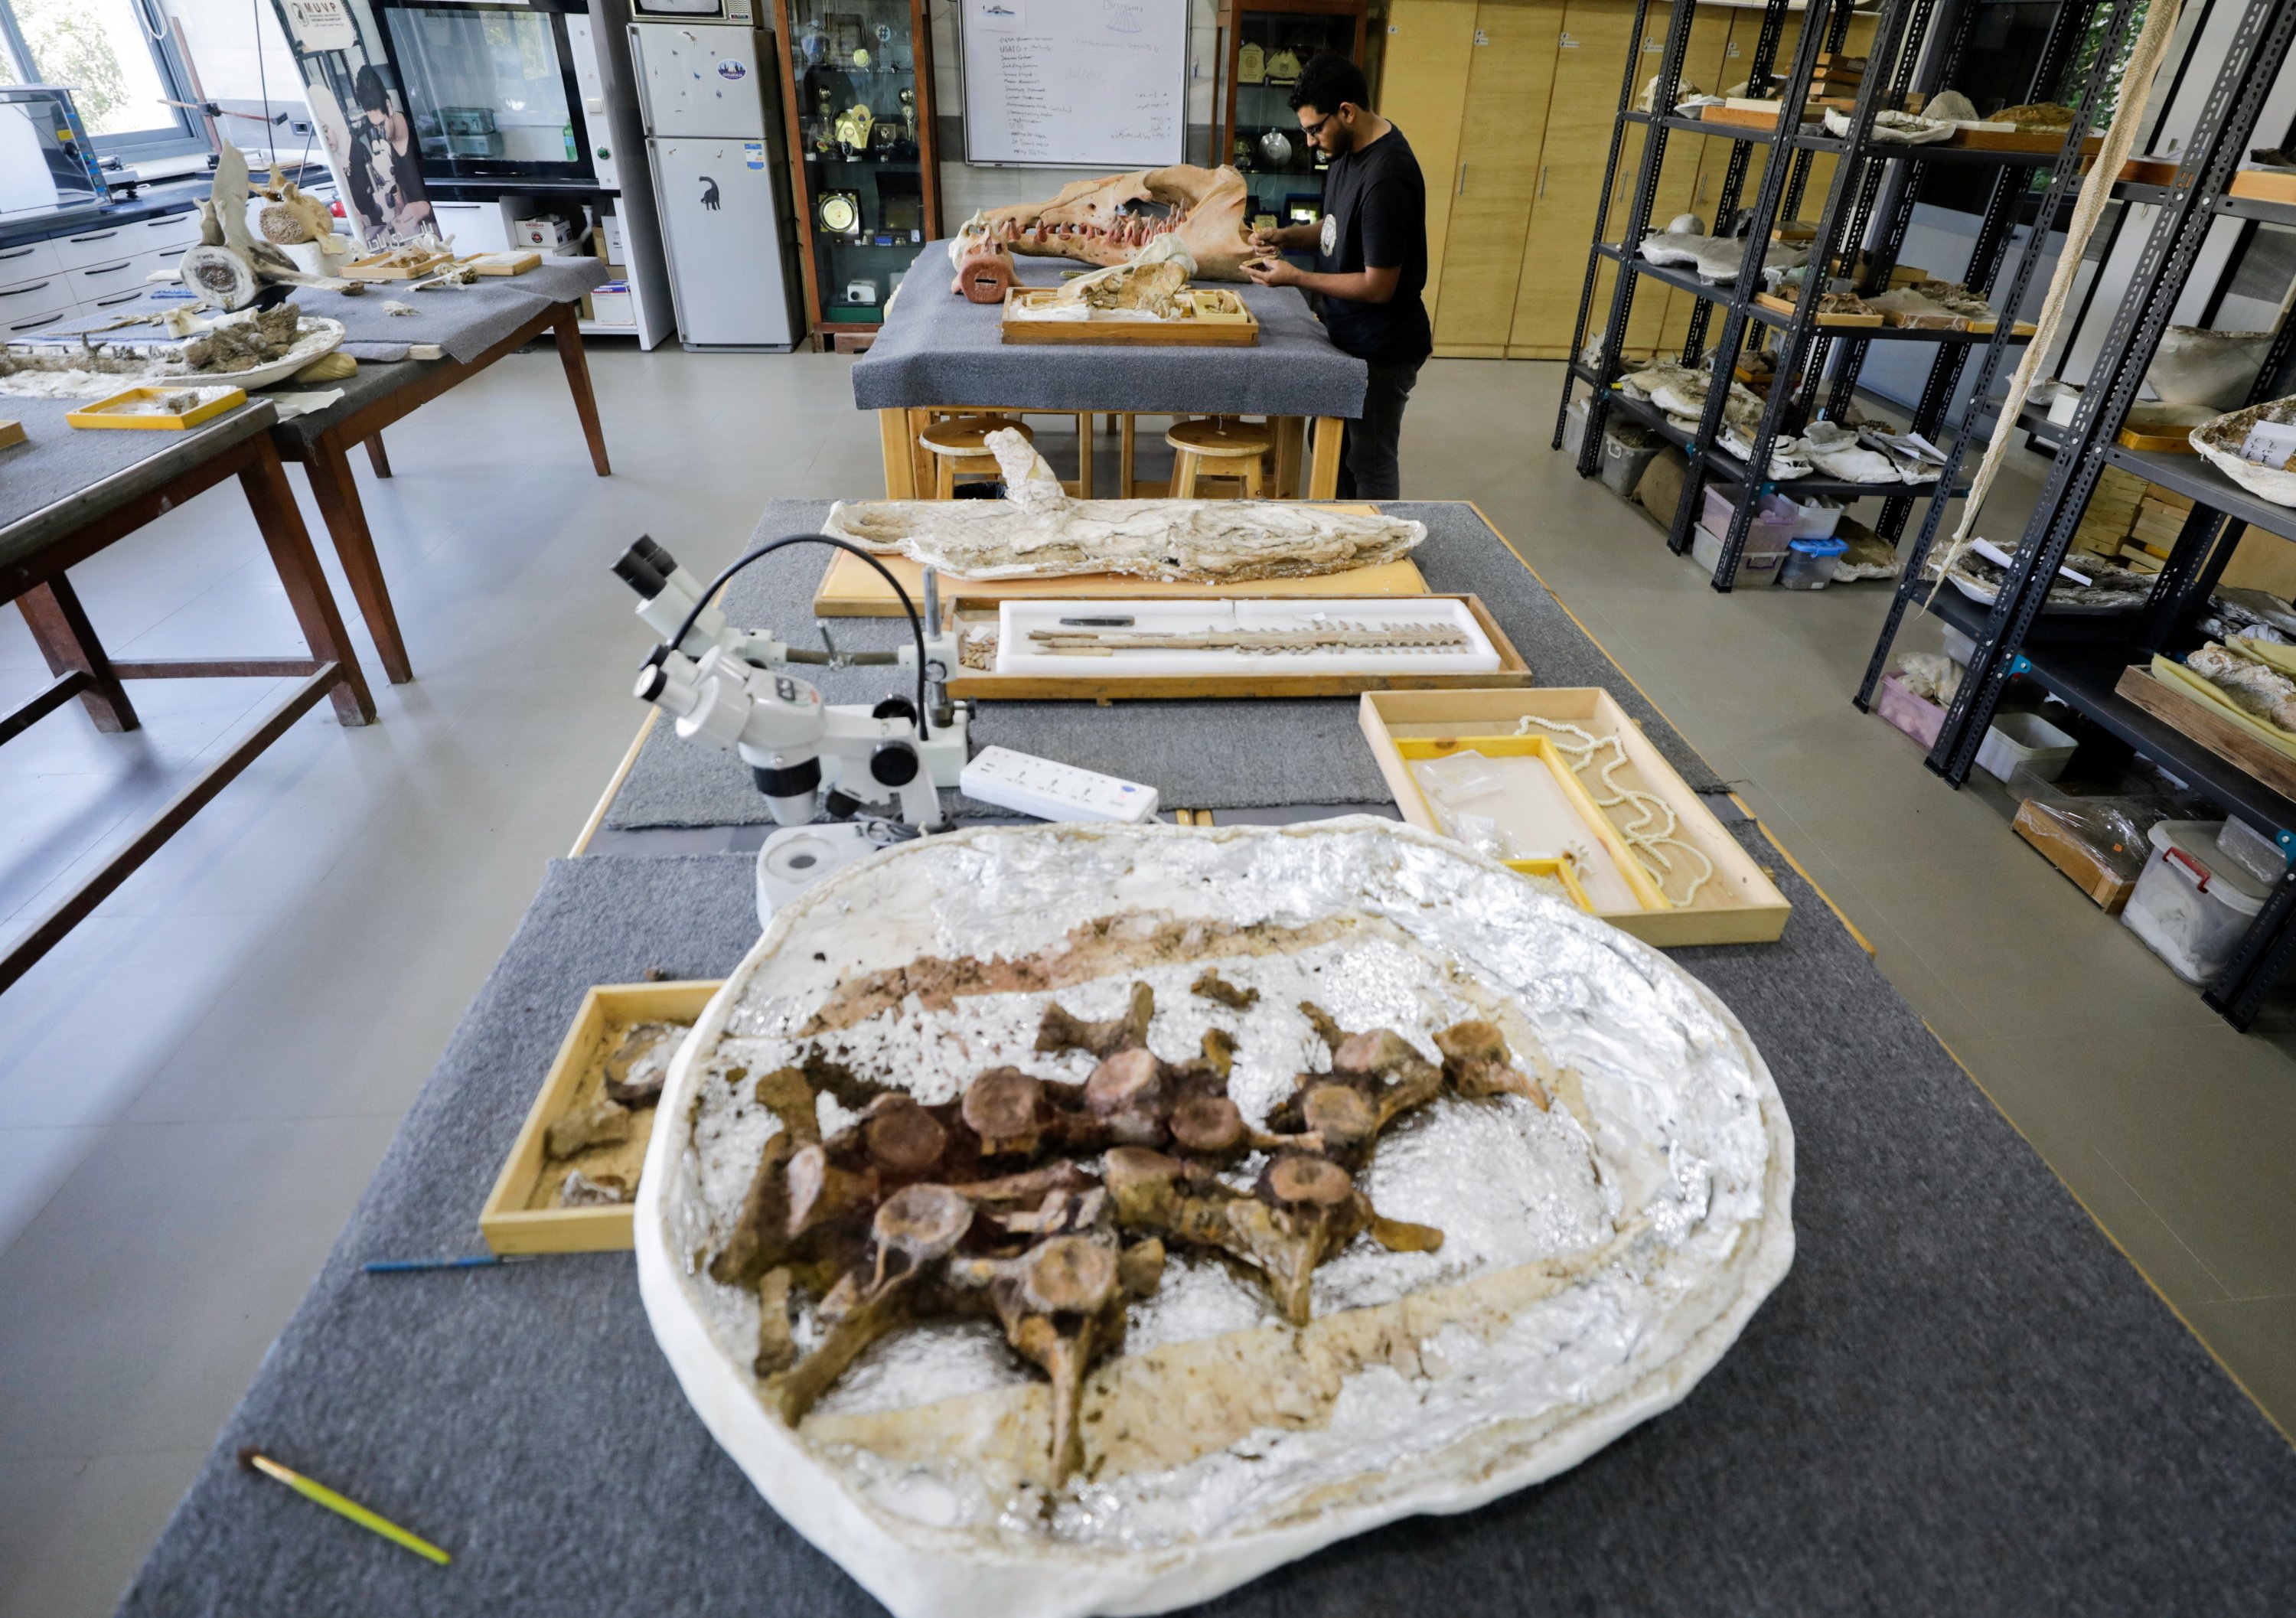 Abdullah Gohar, a researcher at El Mansoura University, works on renovating the 43 million-year-old fossil of a previously unknown amphibious four-legged whale species called "Phiomicetus anubis" that helps trace the transition of whales from land to sea, discovered in the Fayum Depression in the Western Desert, near the town of El Mansoura, north of Cairo, Egypt, August 26, 2021. (Reuters Photo) 